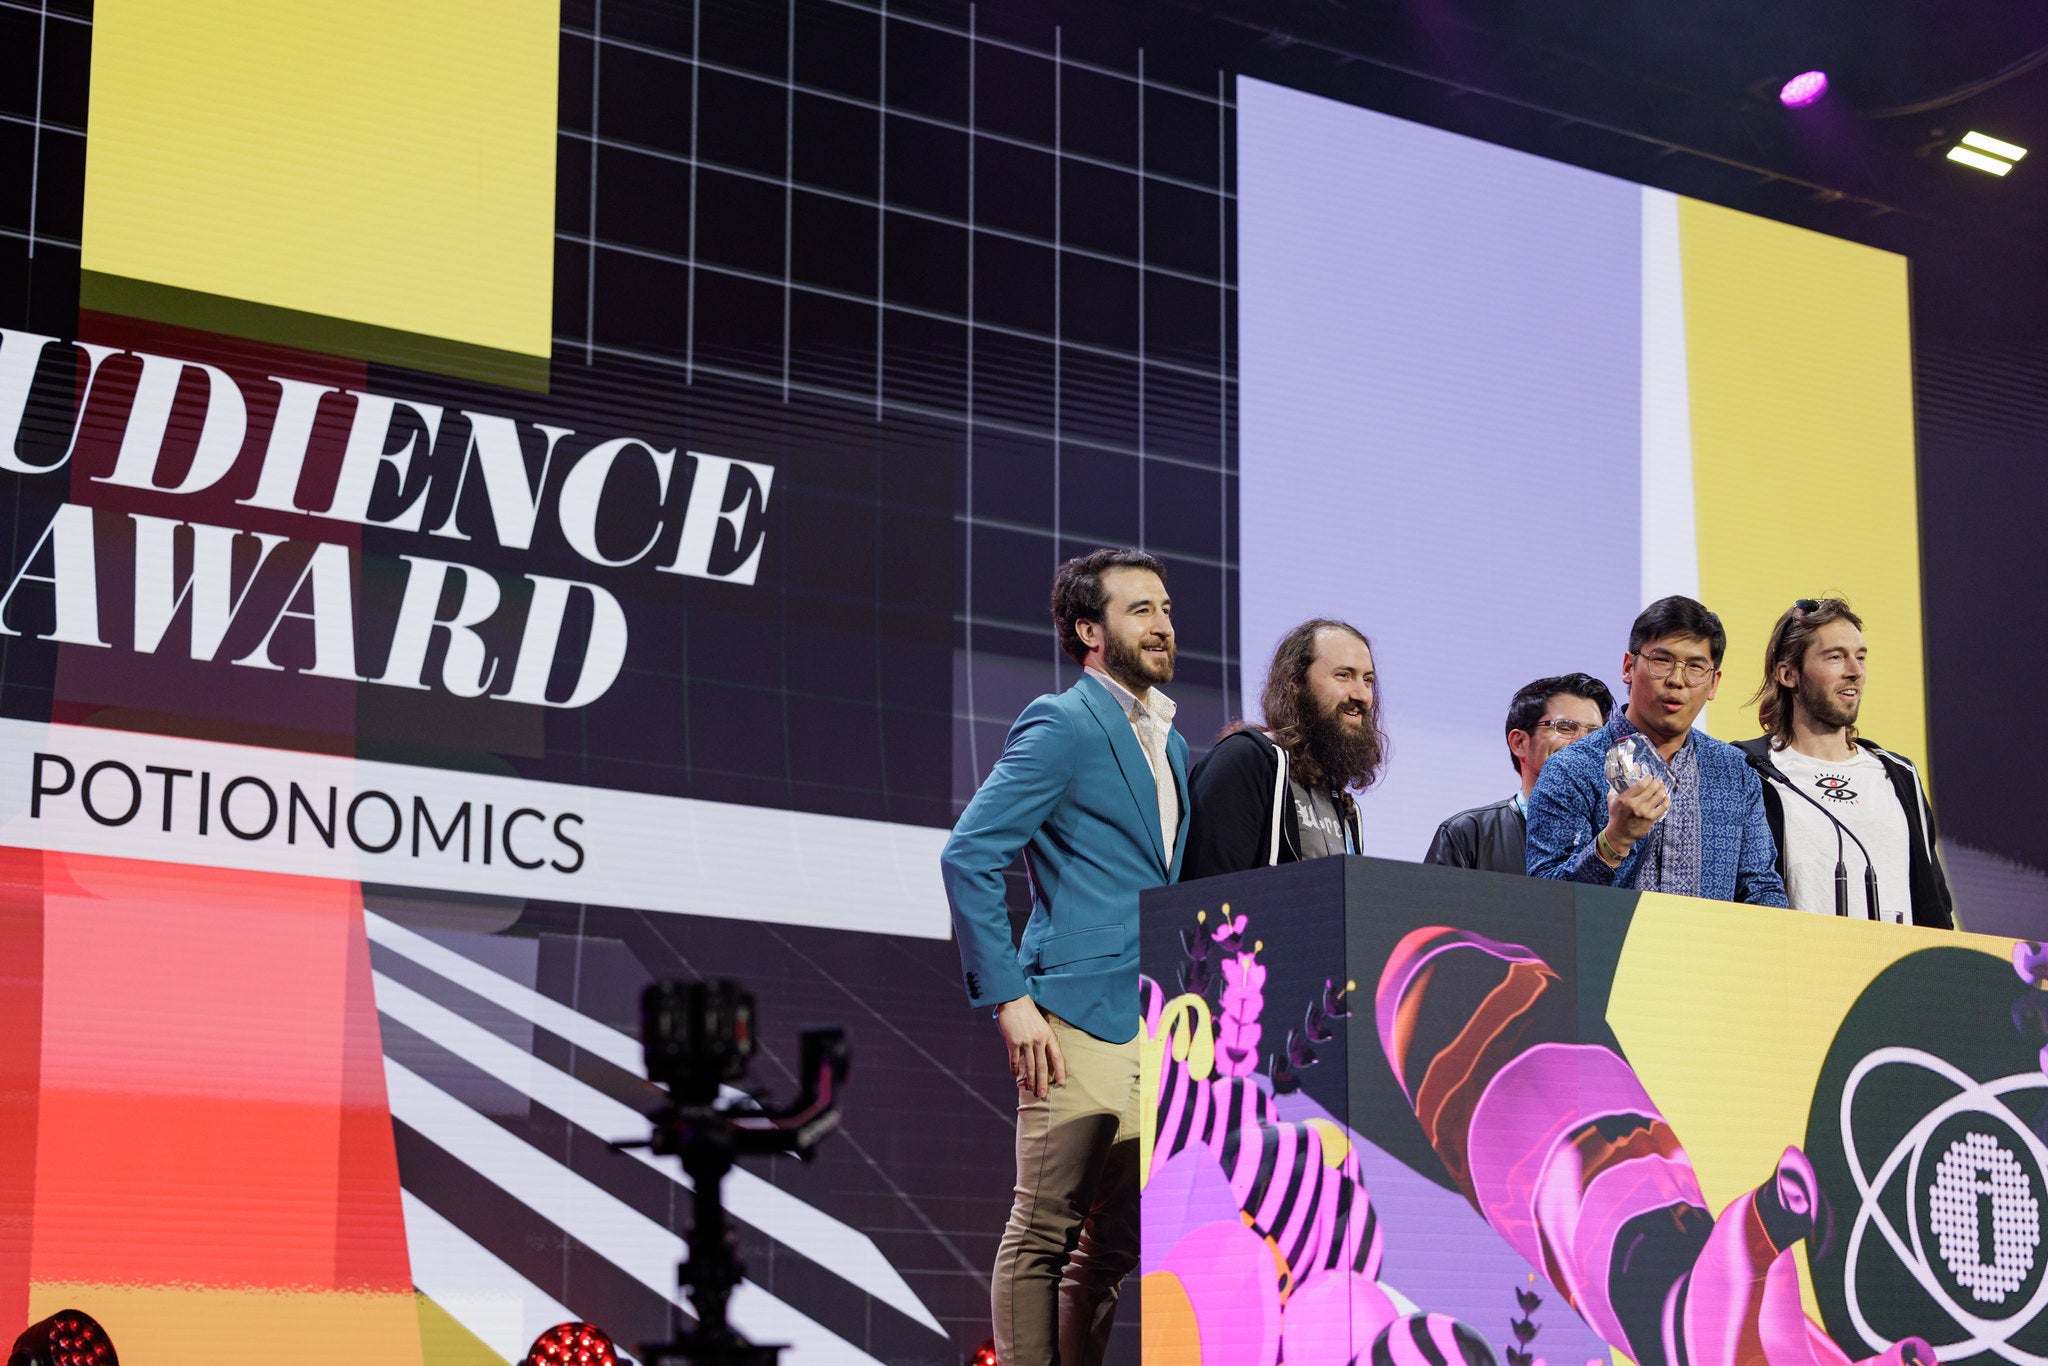 The Potionomics team receive their Audience Award at GDC 2023